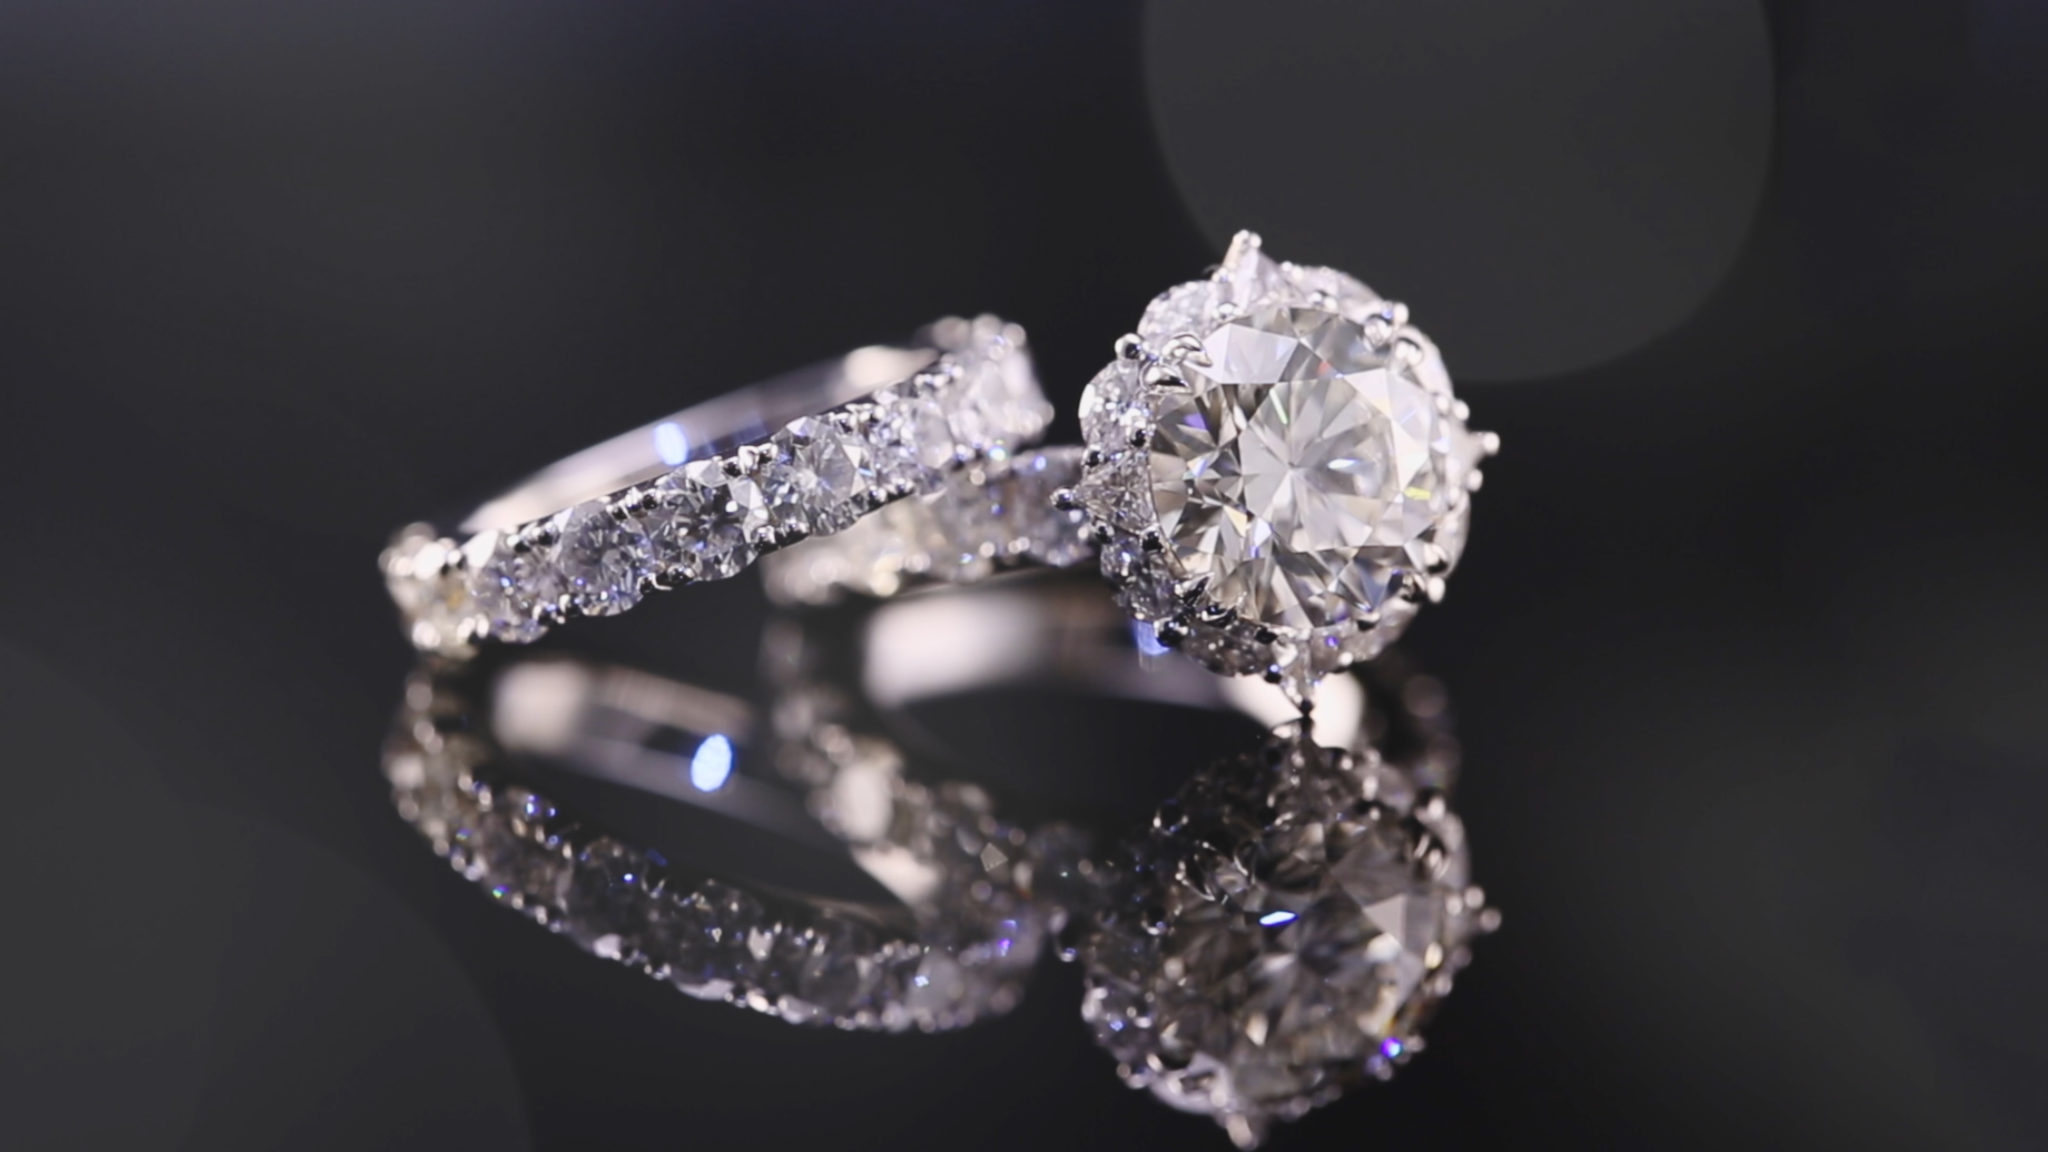 Hawaii Diamond Engagement Rings By Guy